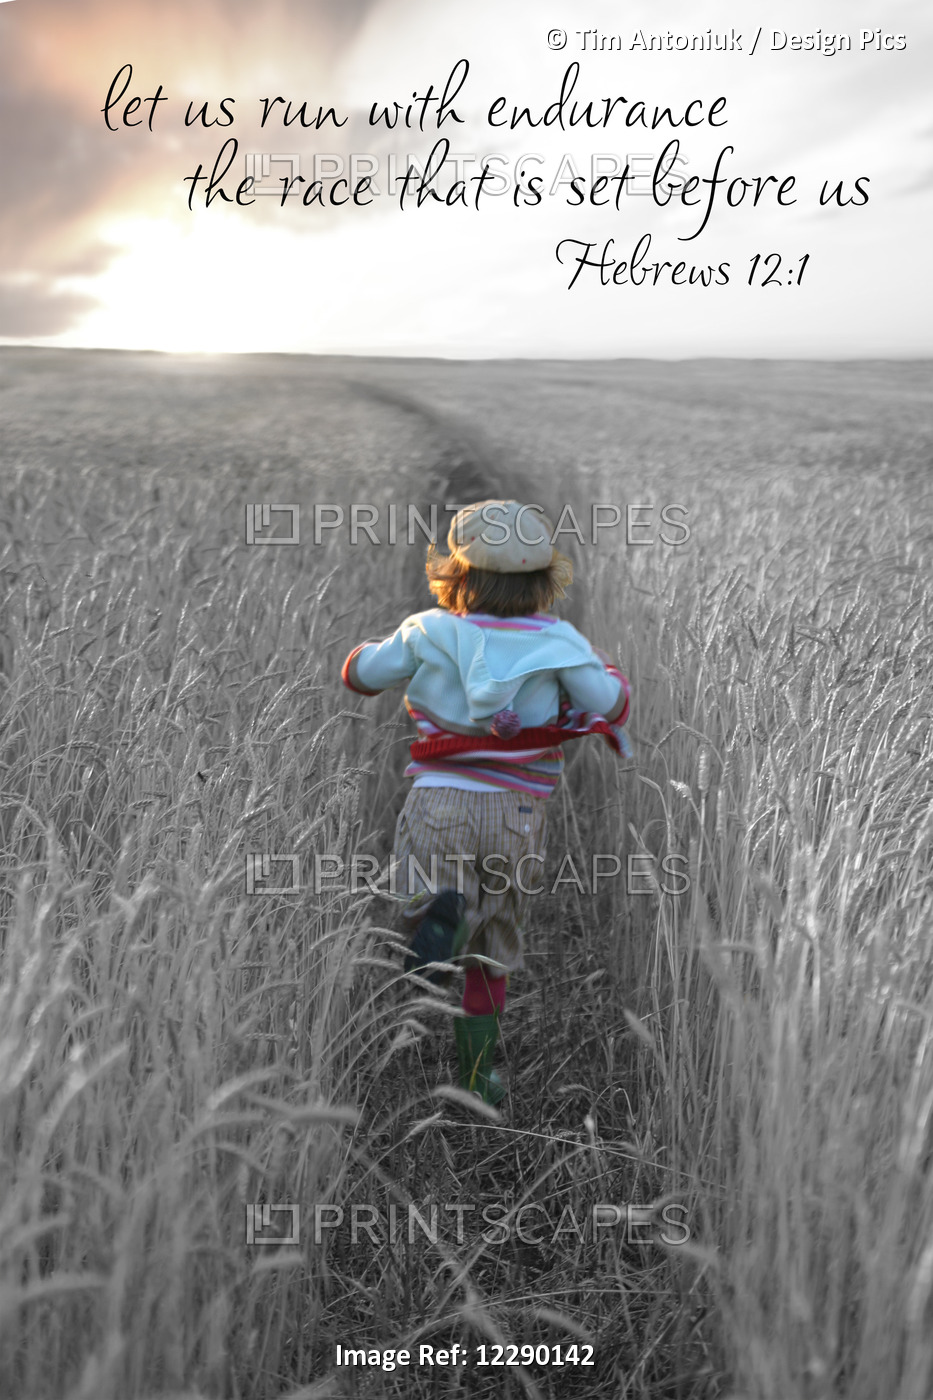 Image Of A Young Girl Running In A Cleared Path Through A Field Of Tall Grass ...